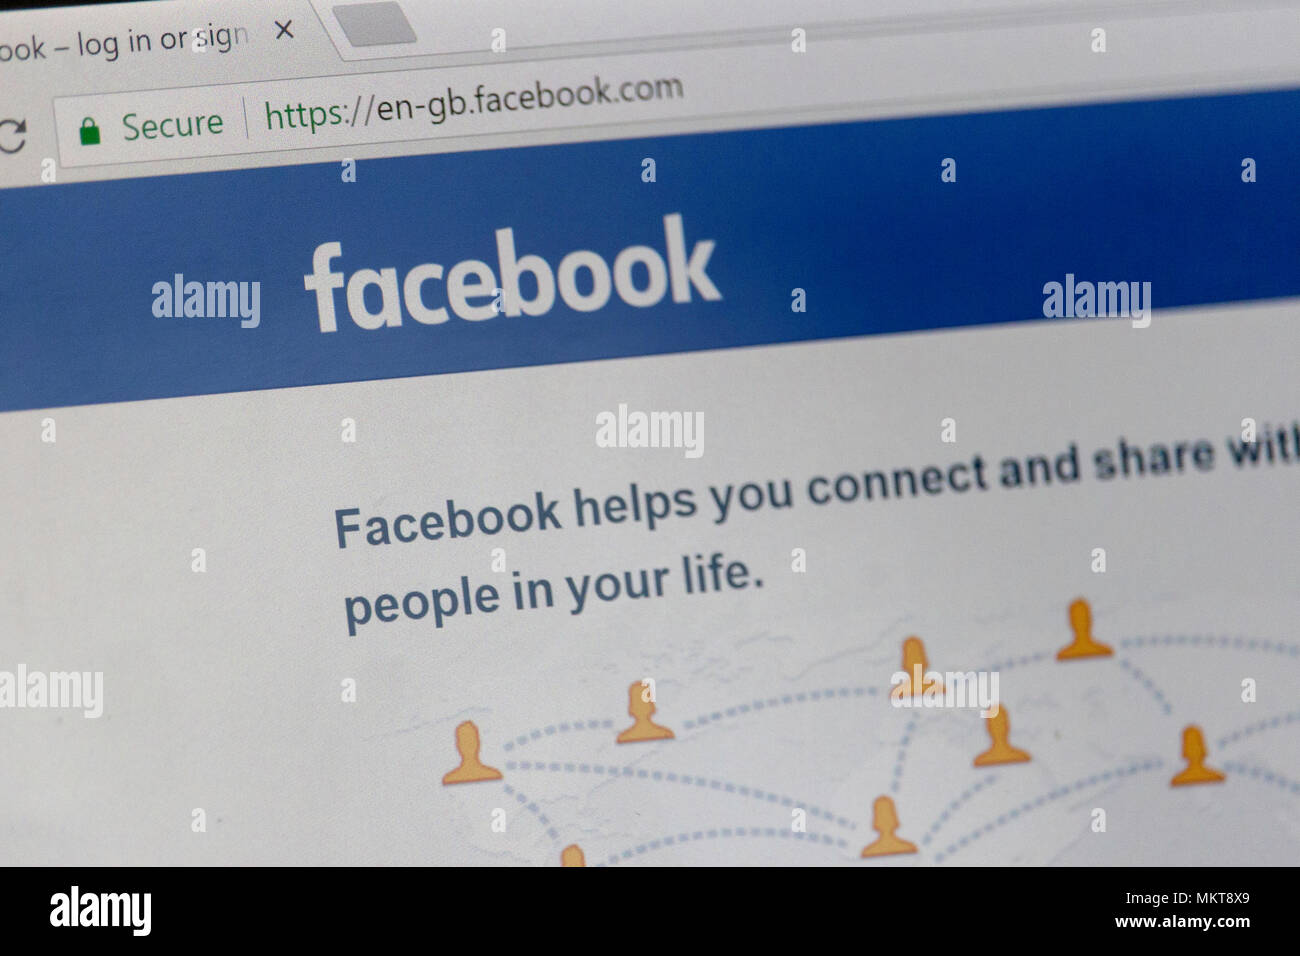 Facebook Logo from Webpage for Editorial Stock Photo